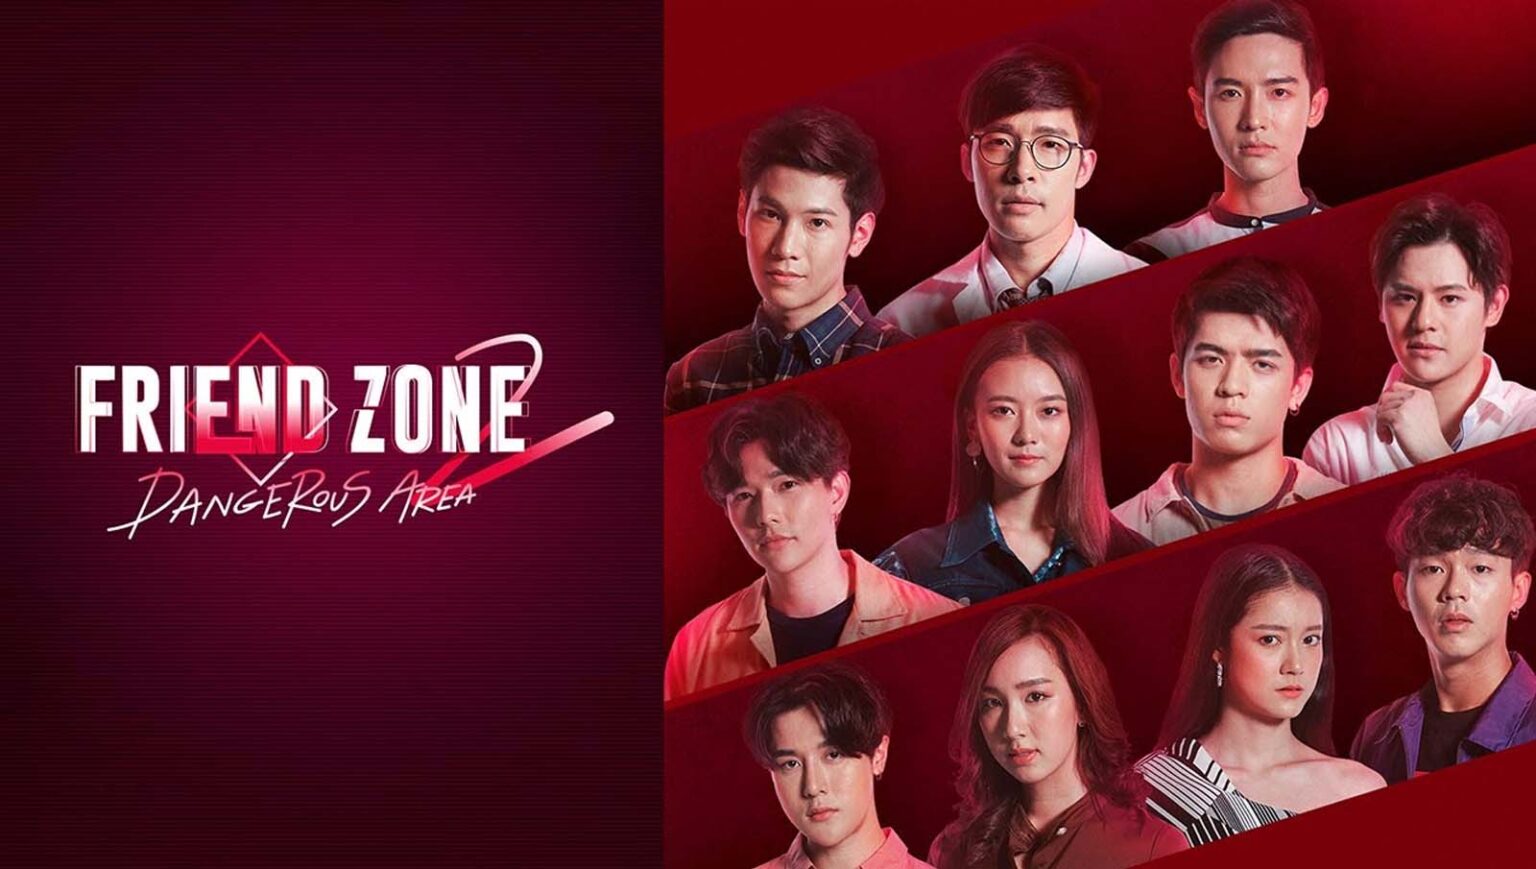 The boy love Thai drama 'Friend Zone' has its second season coming but as of now, we have no idea when. Here's what we know.